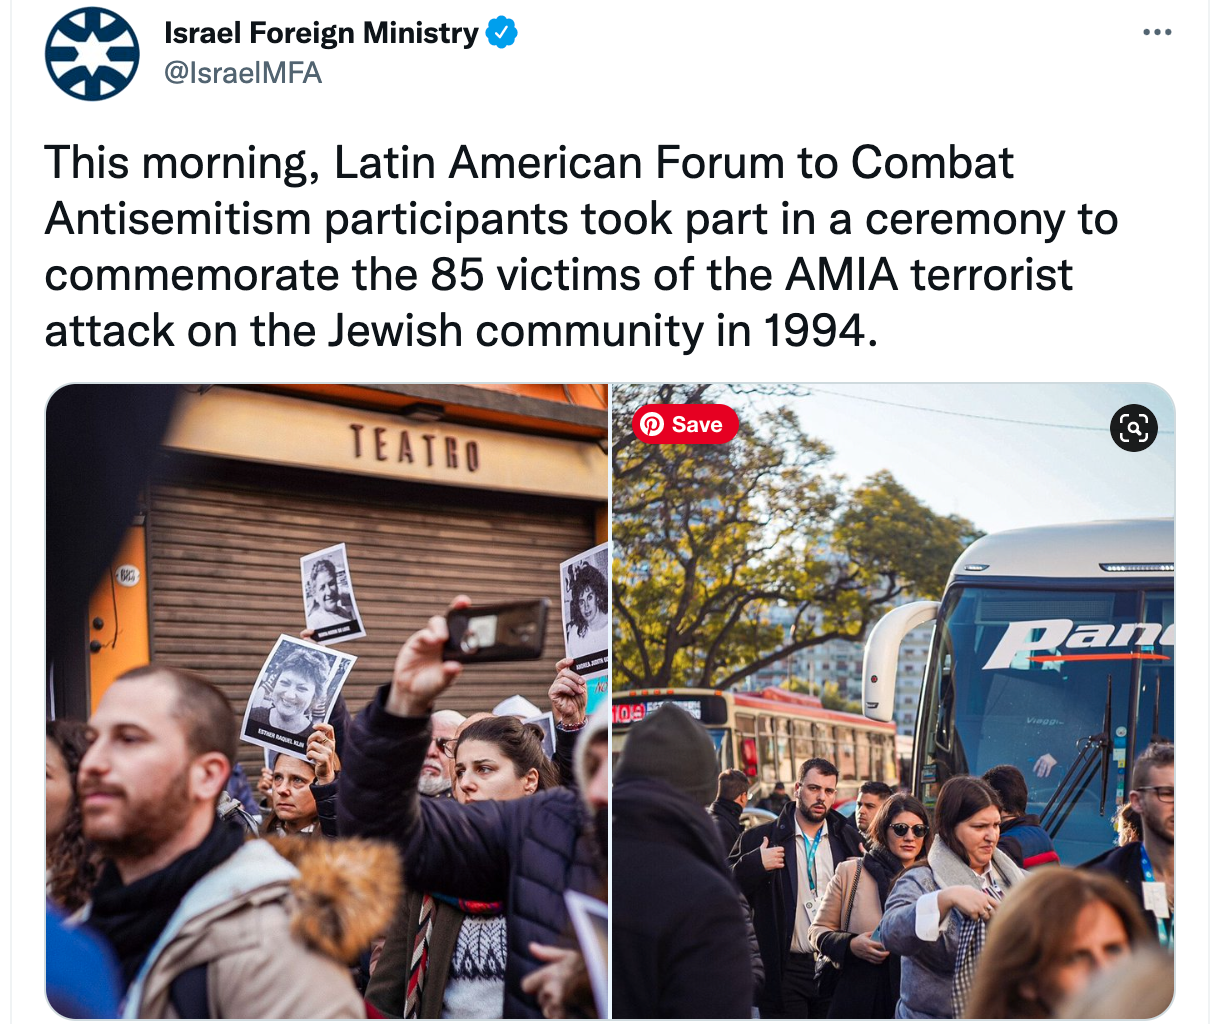 The Israeli Foreign Ministry participated in an event to honor victims of the 1994 AMIA bombing in Buenos Aires on July 18, 2022. Source: Twitter.